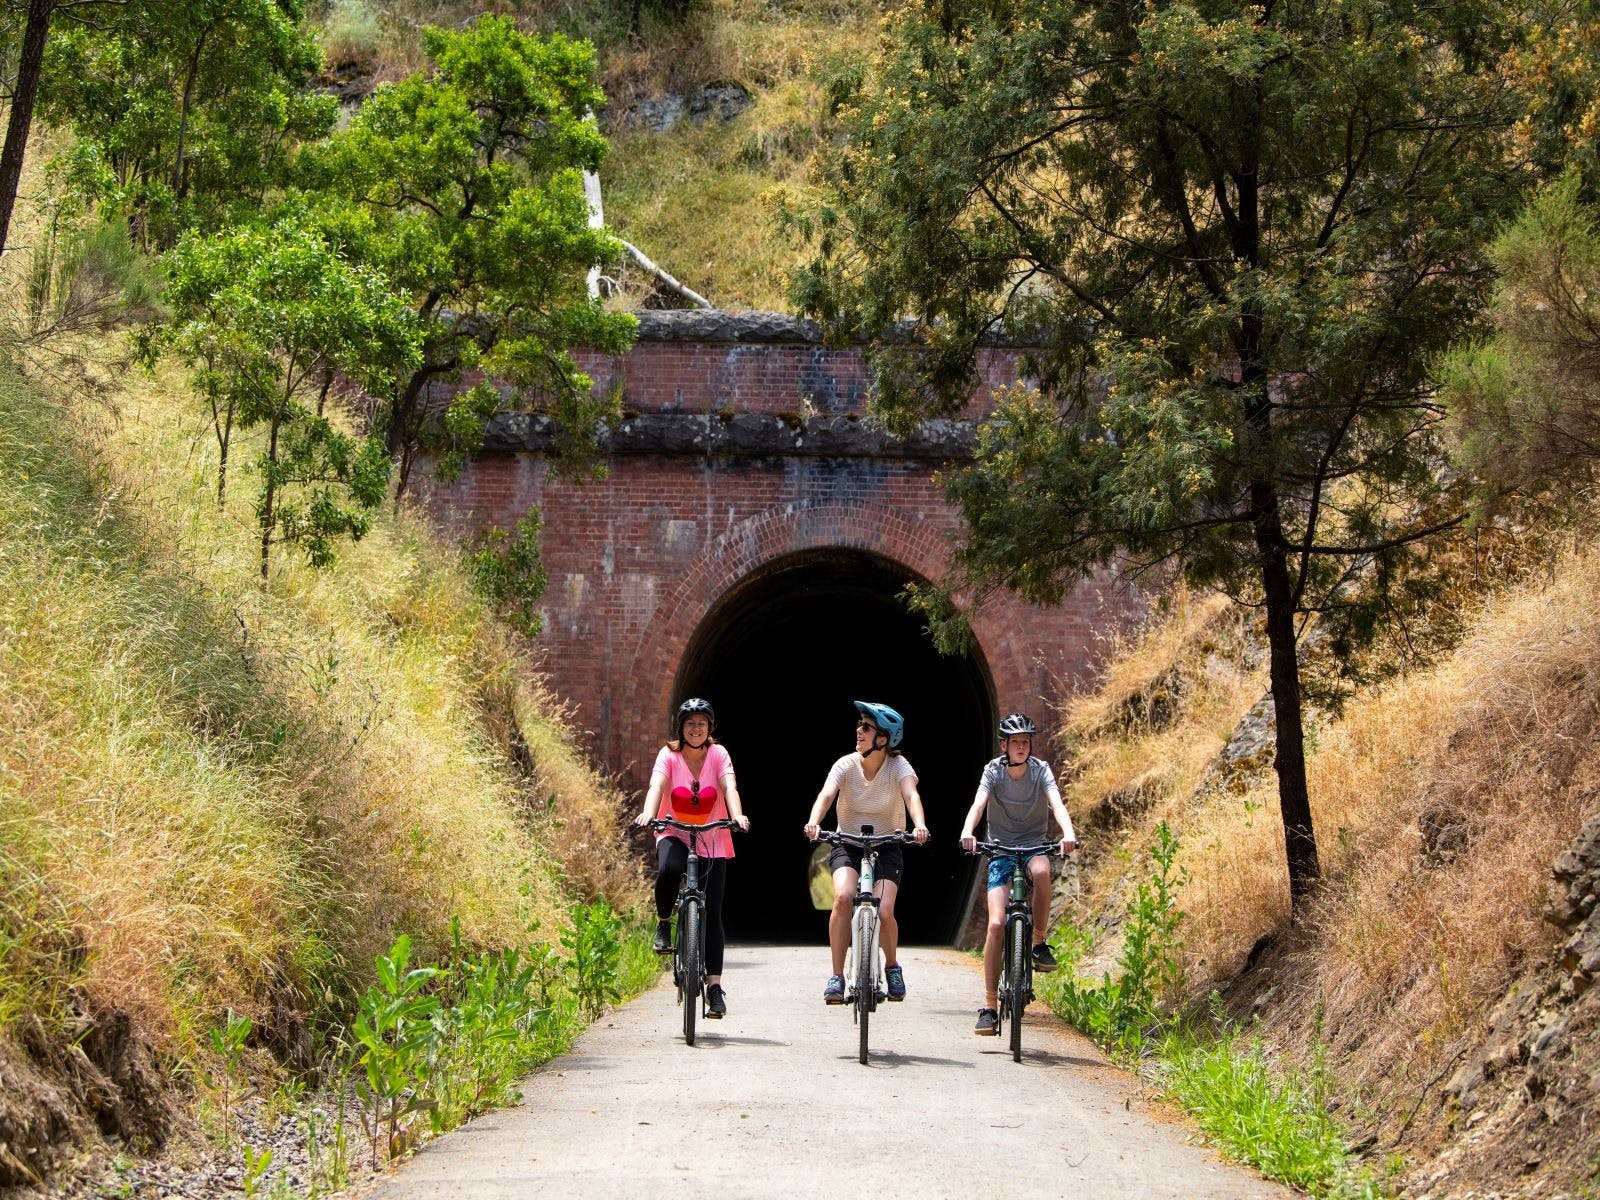 Guests exploring the Cheviot Railway Tunnel along the Great Victorian Rail Trail